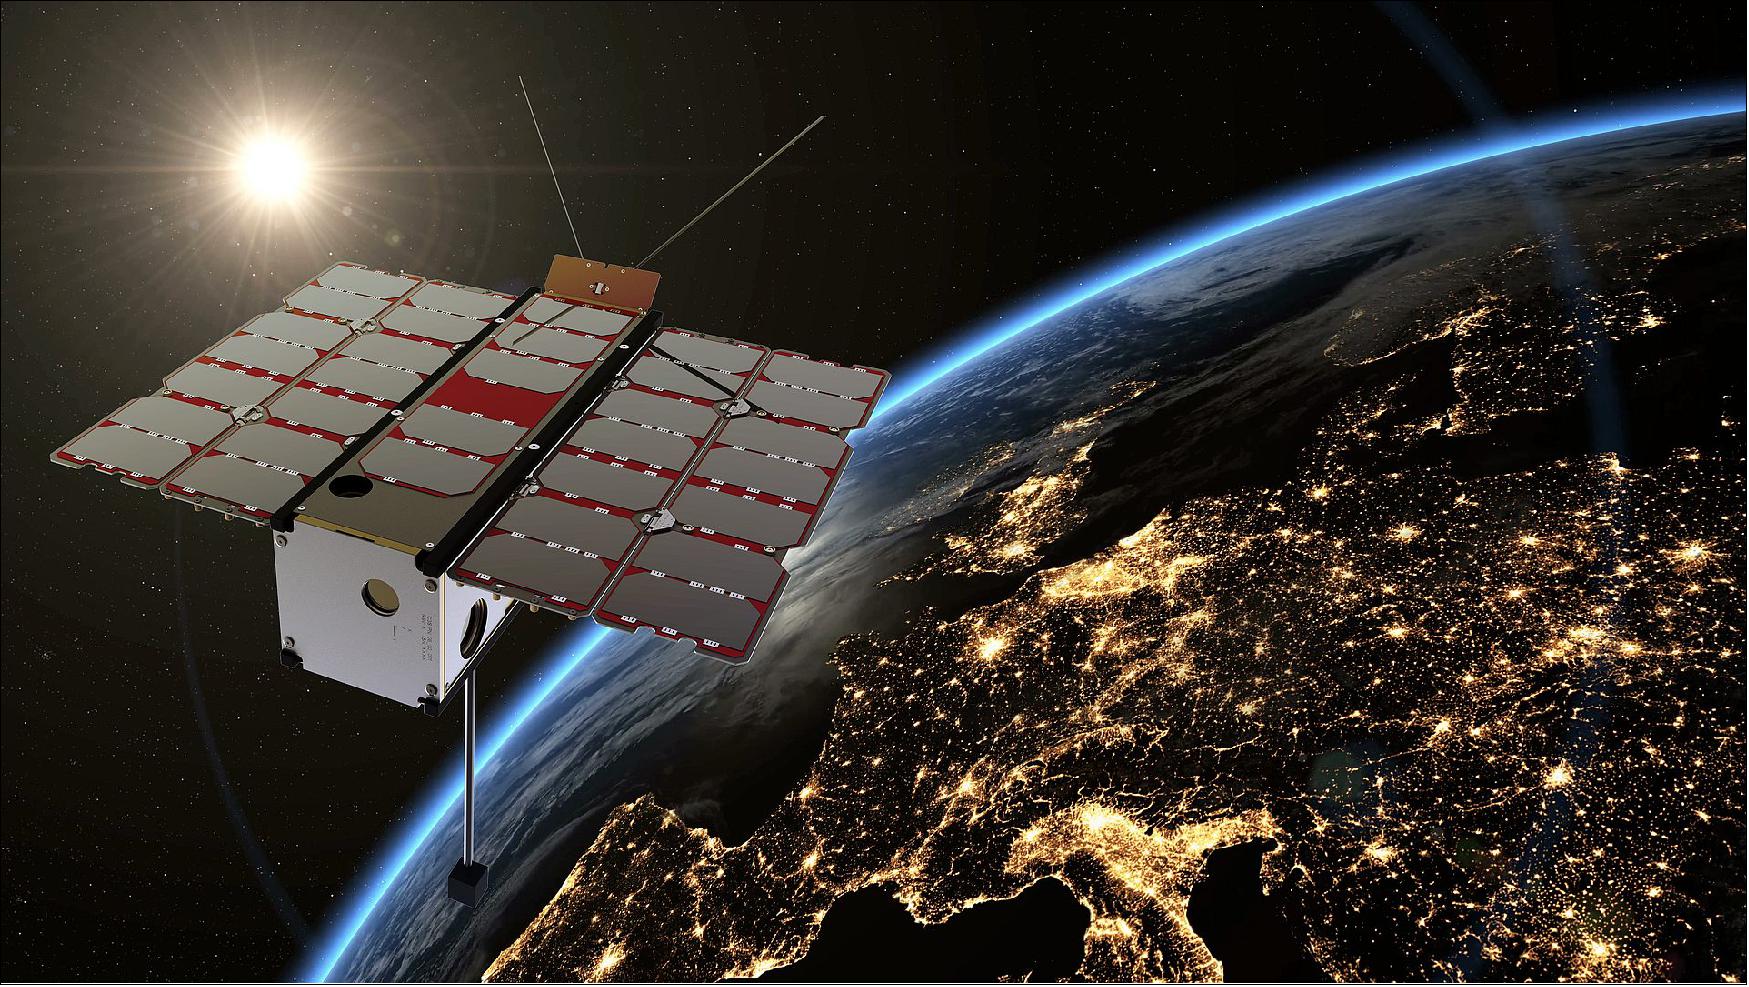 Figure 2: The latest in a series of ESA Technology CubeSats to demonstrate promising technologies for space, RadCube was supported through the ‘Fly’ element of ESA’s General Support Technology Program (GSTP), with funding coming from Hungary, the UK and Poland (image credit: C3S)